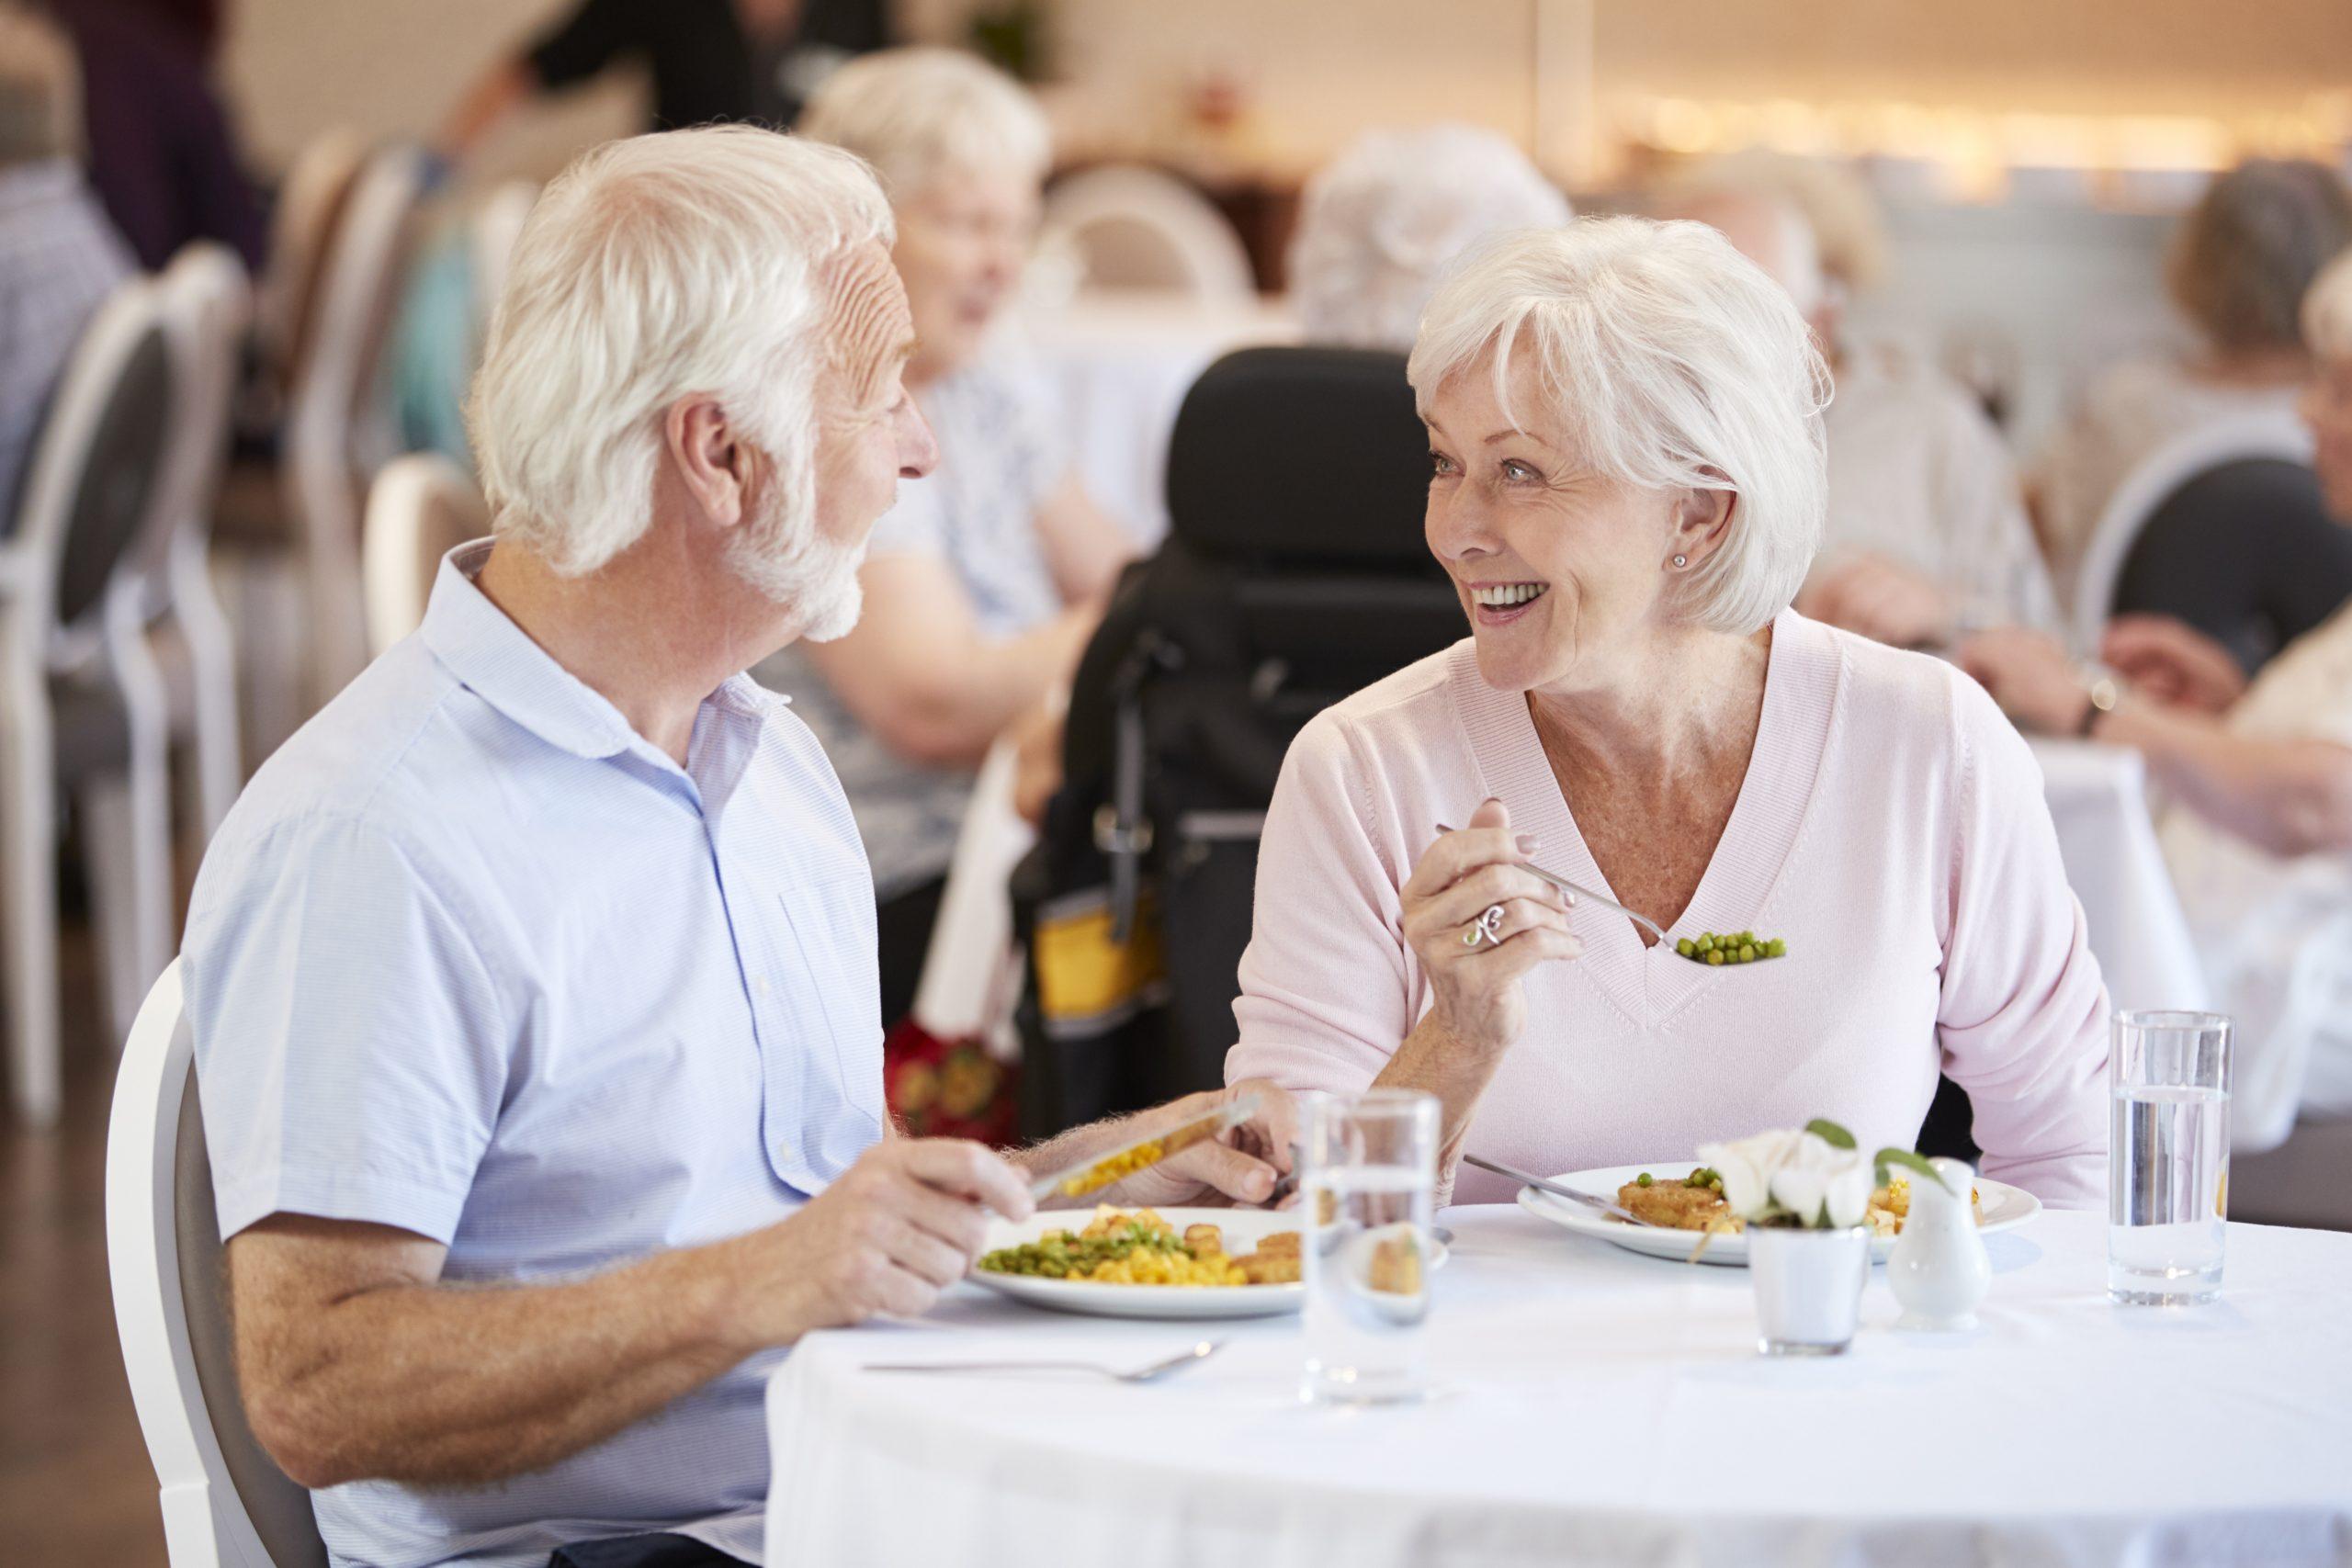 Specialty Diets and Dietary Options in Senior Living Communities